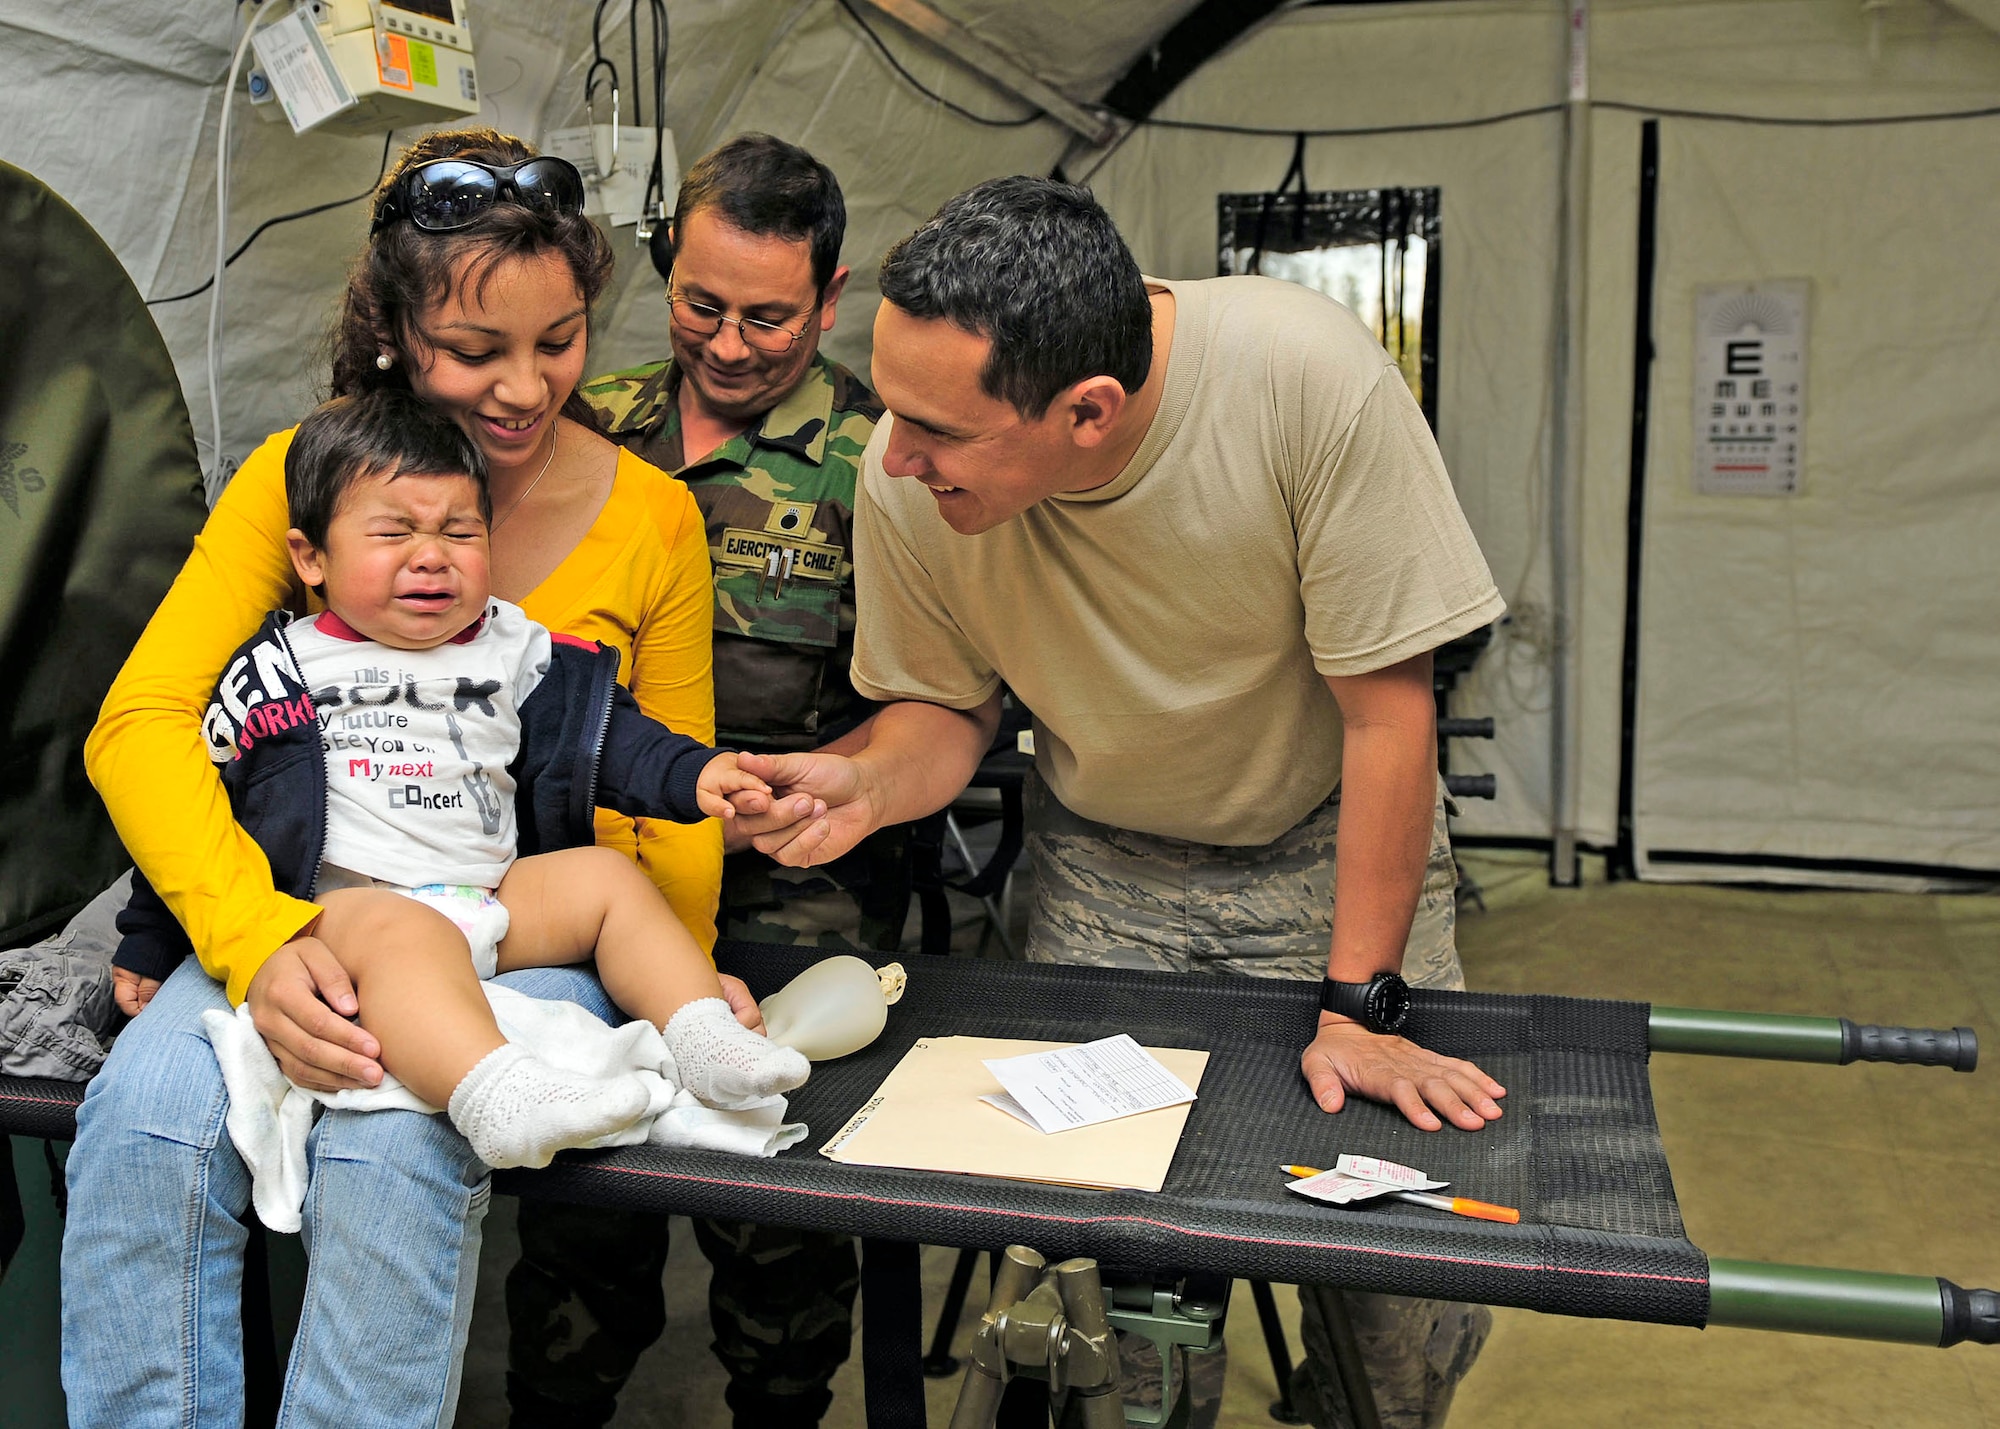 Staff Sgt. Abraham Rodriguez (left) comforts a crying Chilean child at the expeditionary hospital March 14, 2010, in Angol, Chile. Sergeant Rodriguez is a translator for more than 80 members of the Air Force Expeditionary Medical Support Team here. Sergeant Rodriguez is the NCO in charge of the Defense Institute for Medical Operations at the Air Force School of Aerospace Medicine at Brooks City-Base, Texas. (U.S. Air Force photo/Senior Airman Tiffany Trojca)
